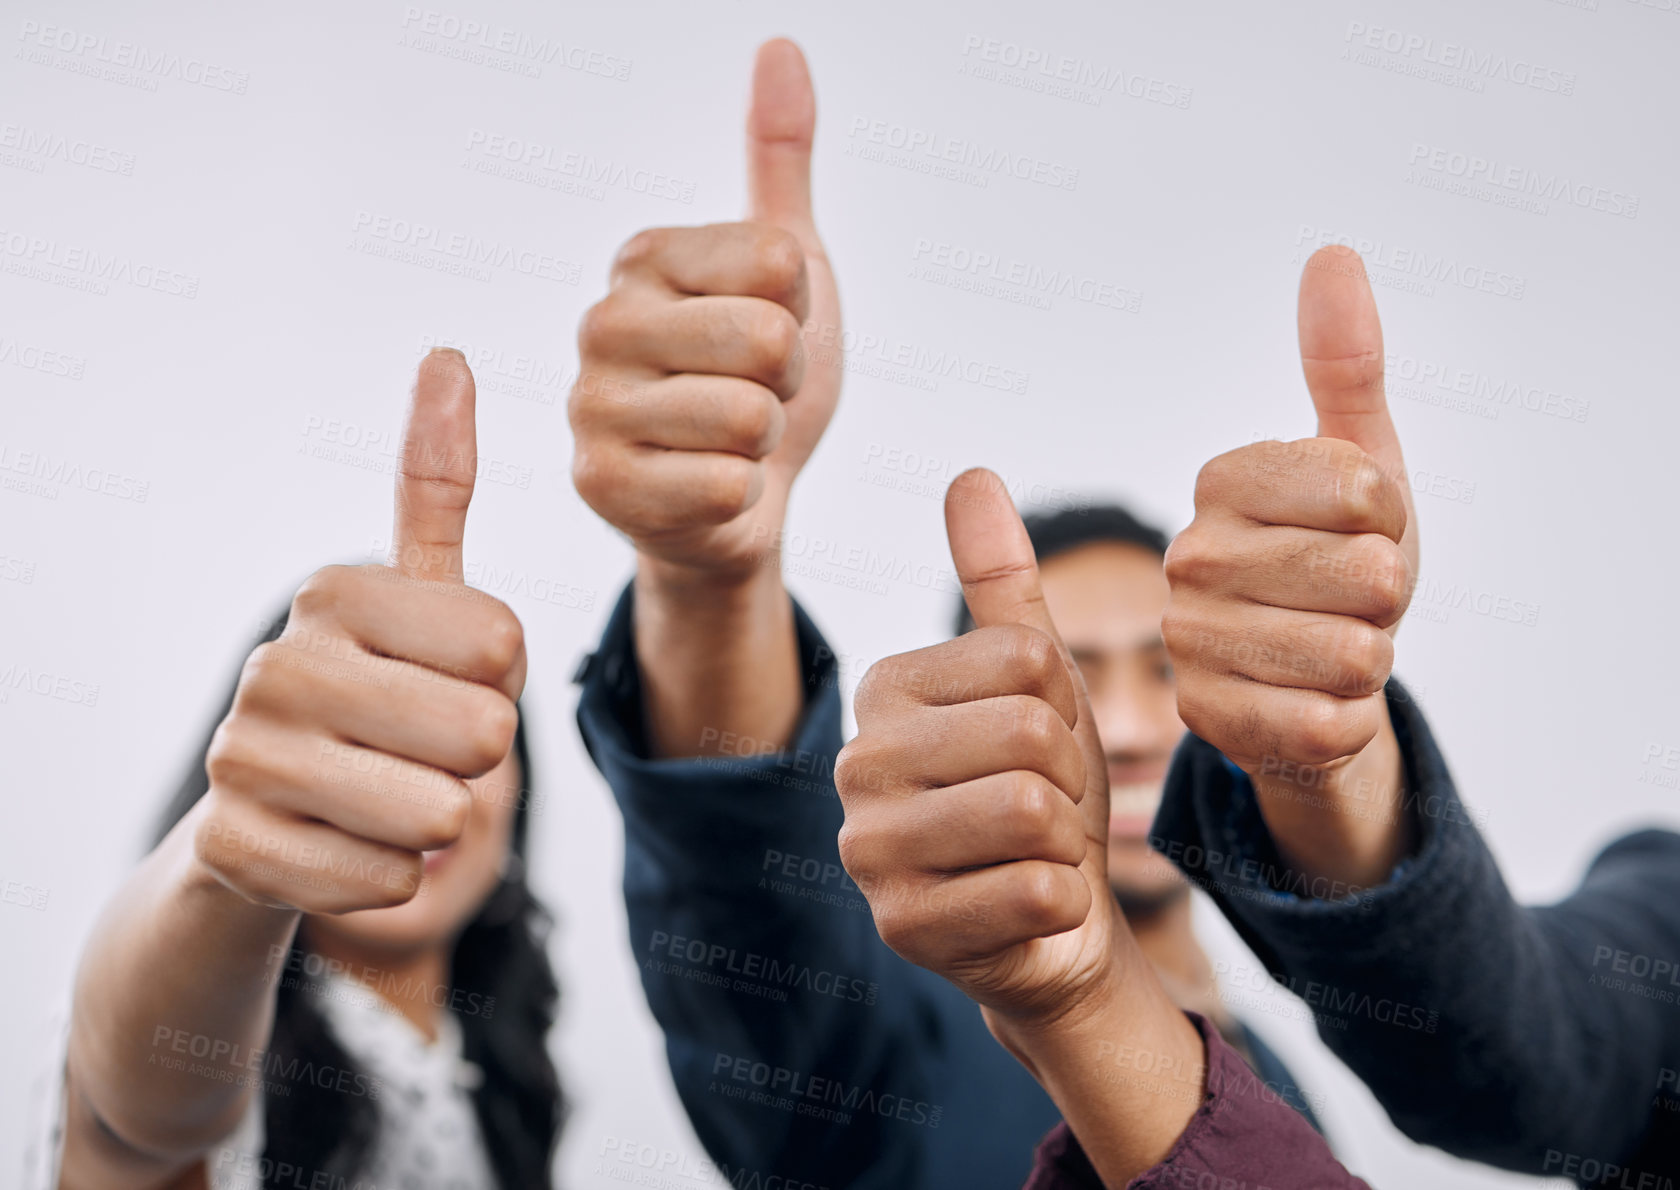 Buy stock photo Shot of a group of businesspeople giving the thumbs up